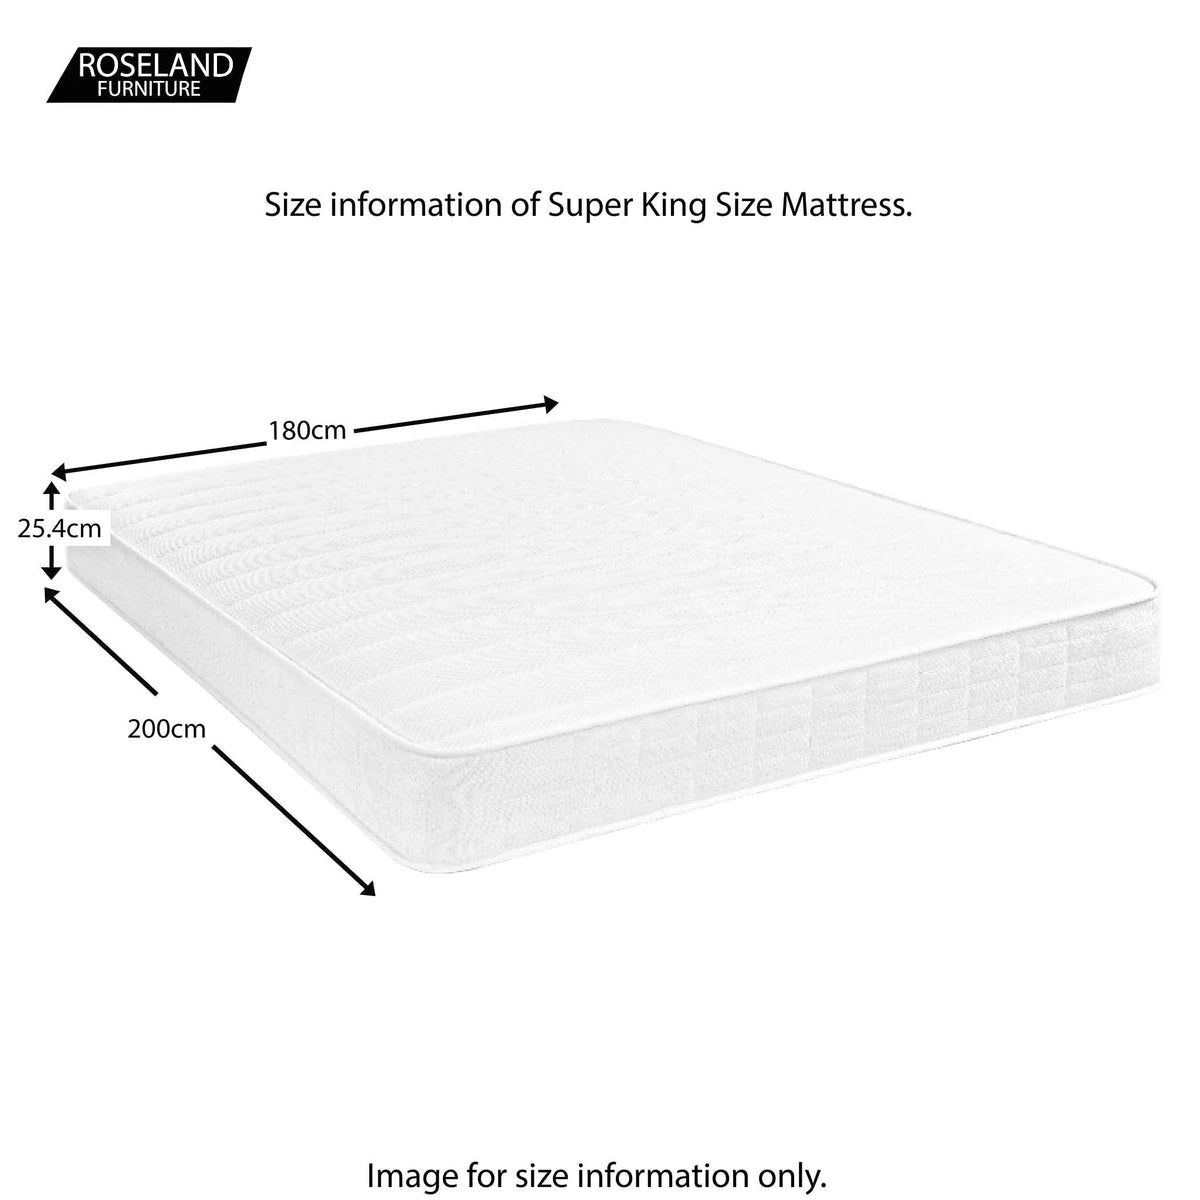 Roseland Sleep Meadow - Super King Size, Size Guide